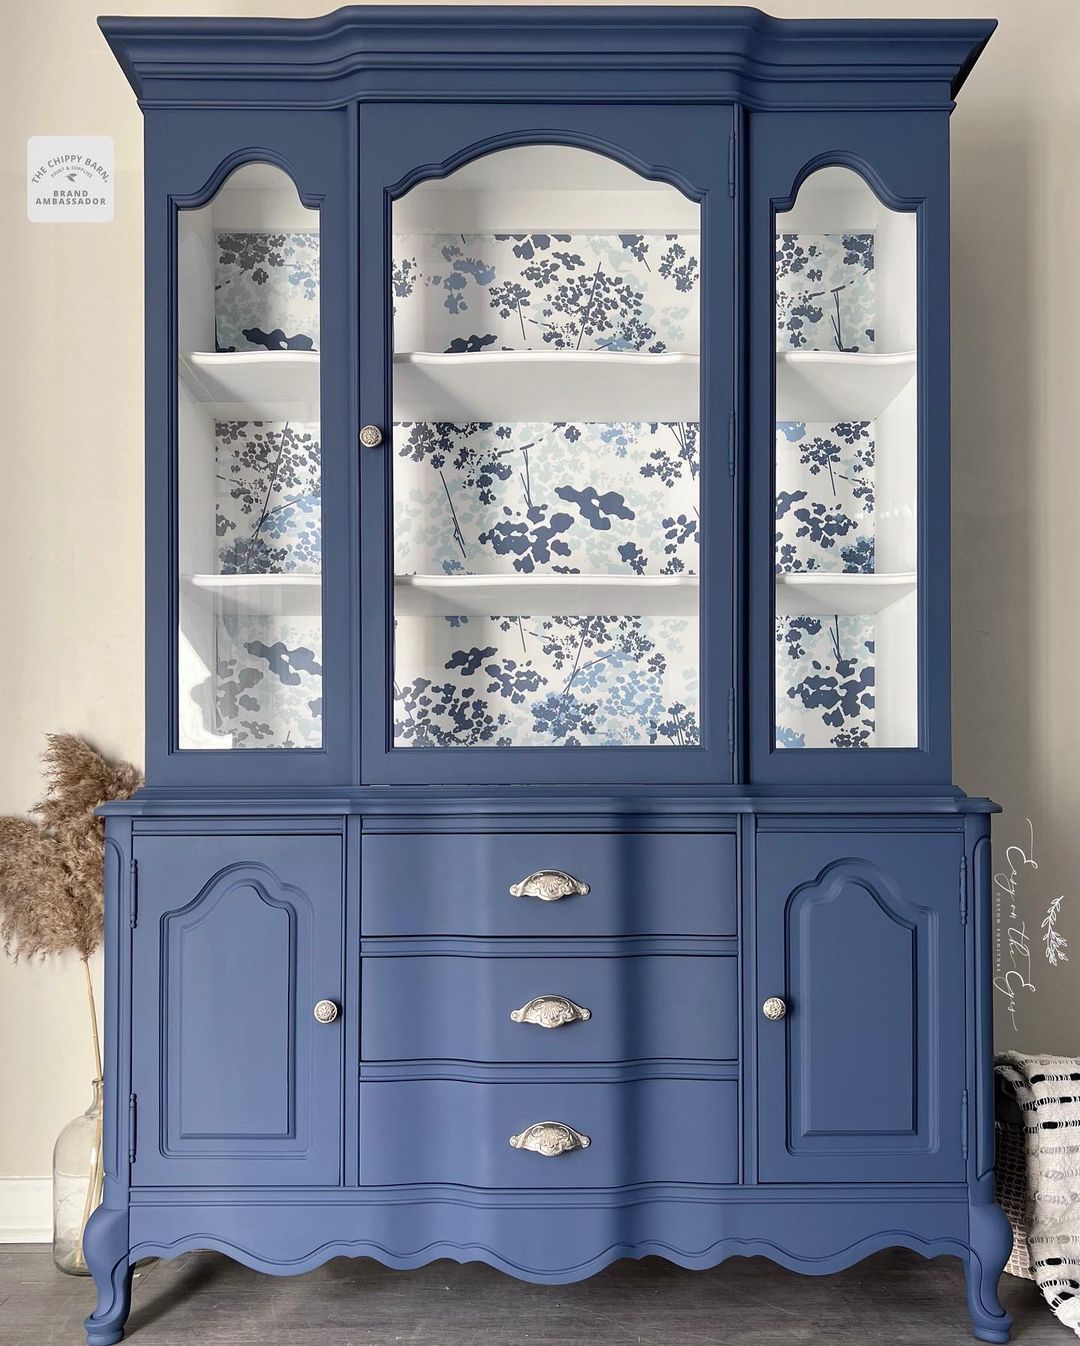 Bringing Vintage Charm to Your Home: The Timeless Elegance of Painted French Provincial Furniture